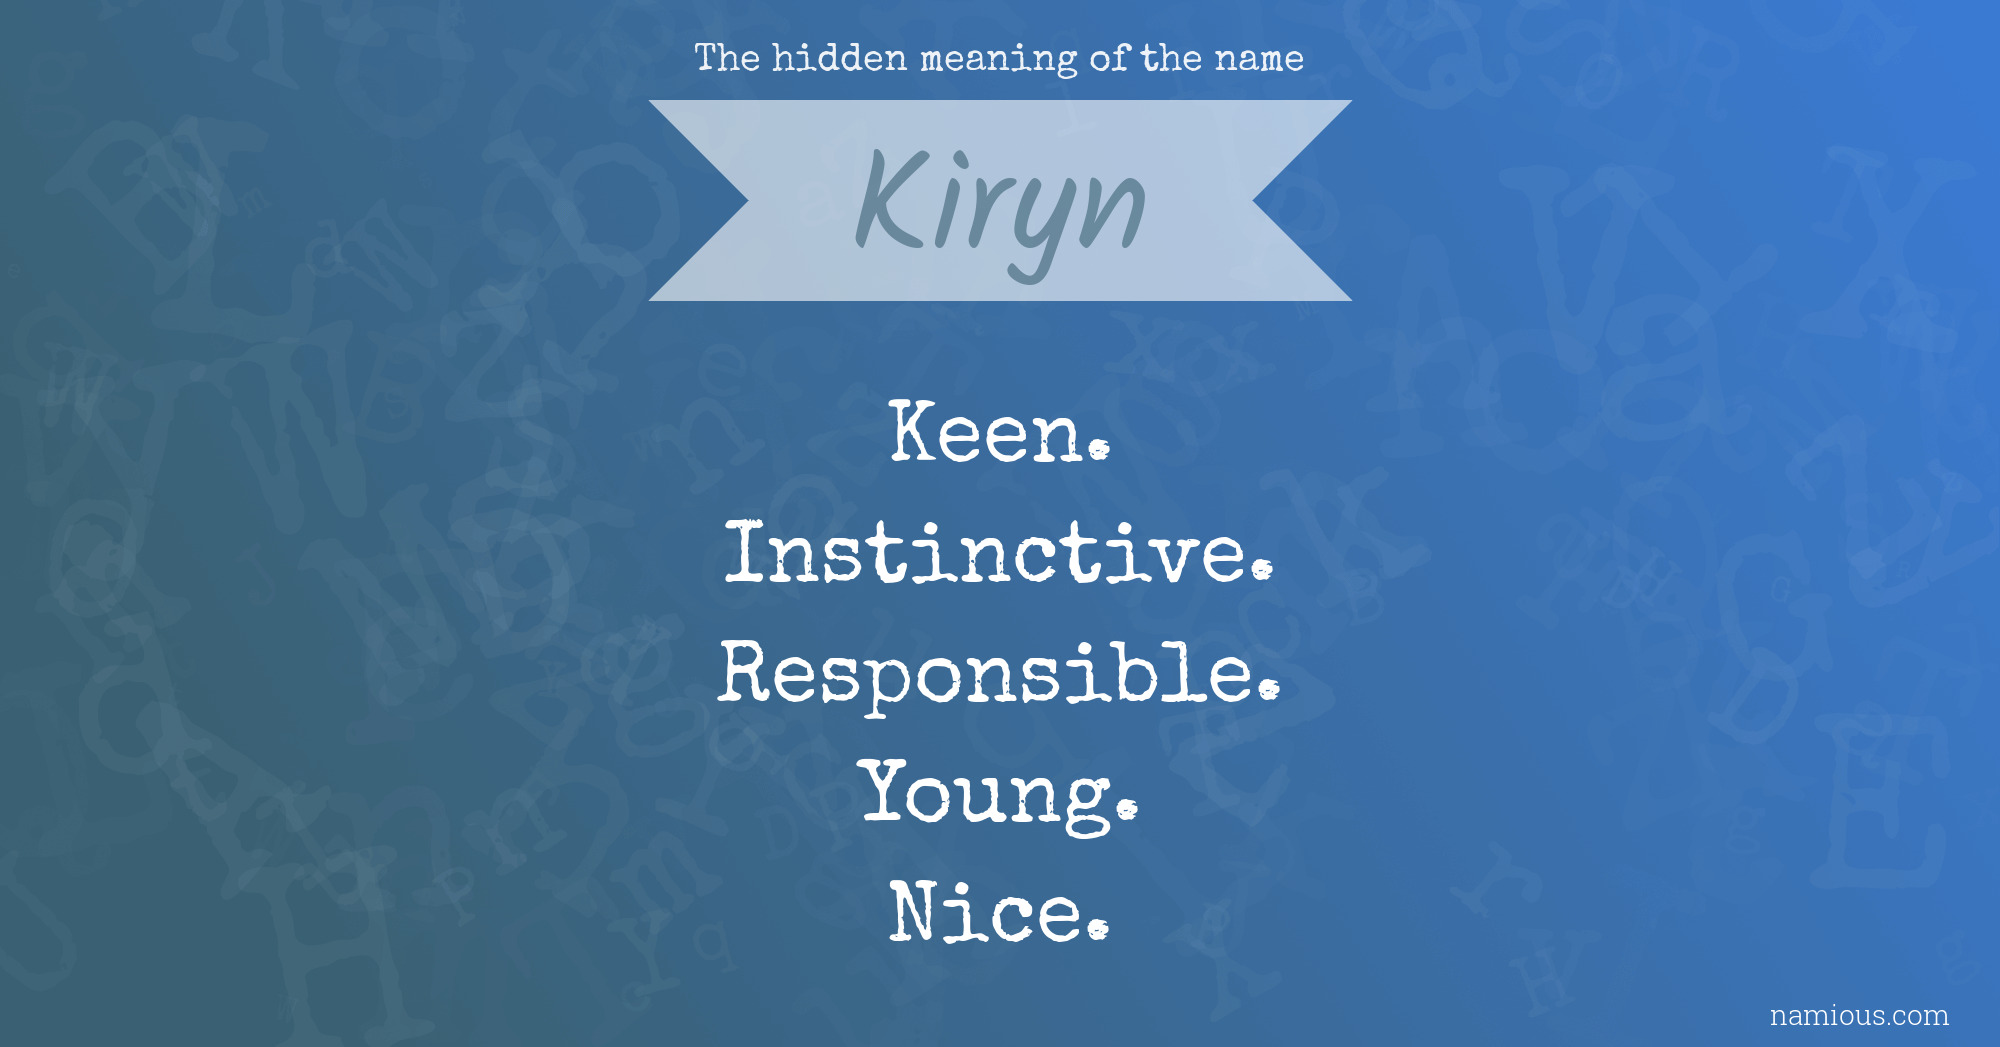 The hidden meaning of the name Kiryn